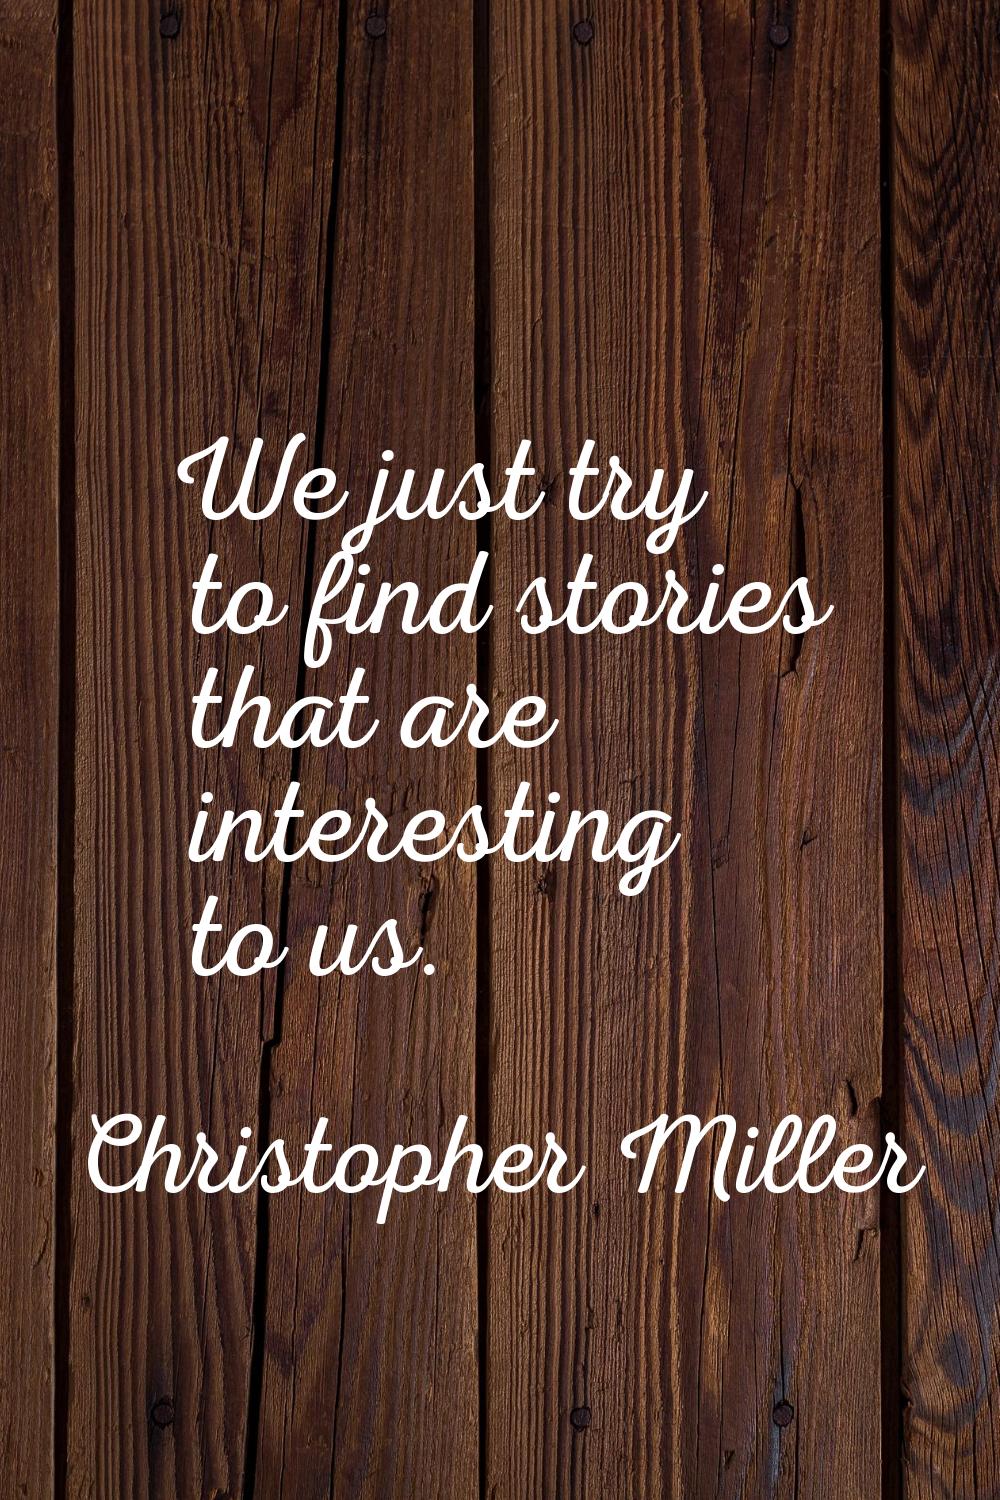 We just try to find stories that are interesting to us.